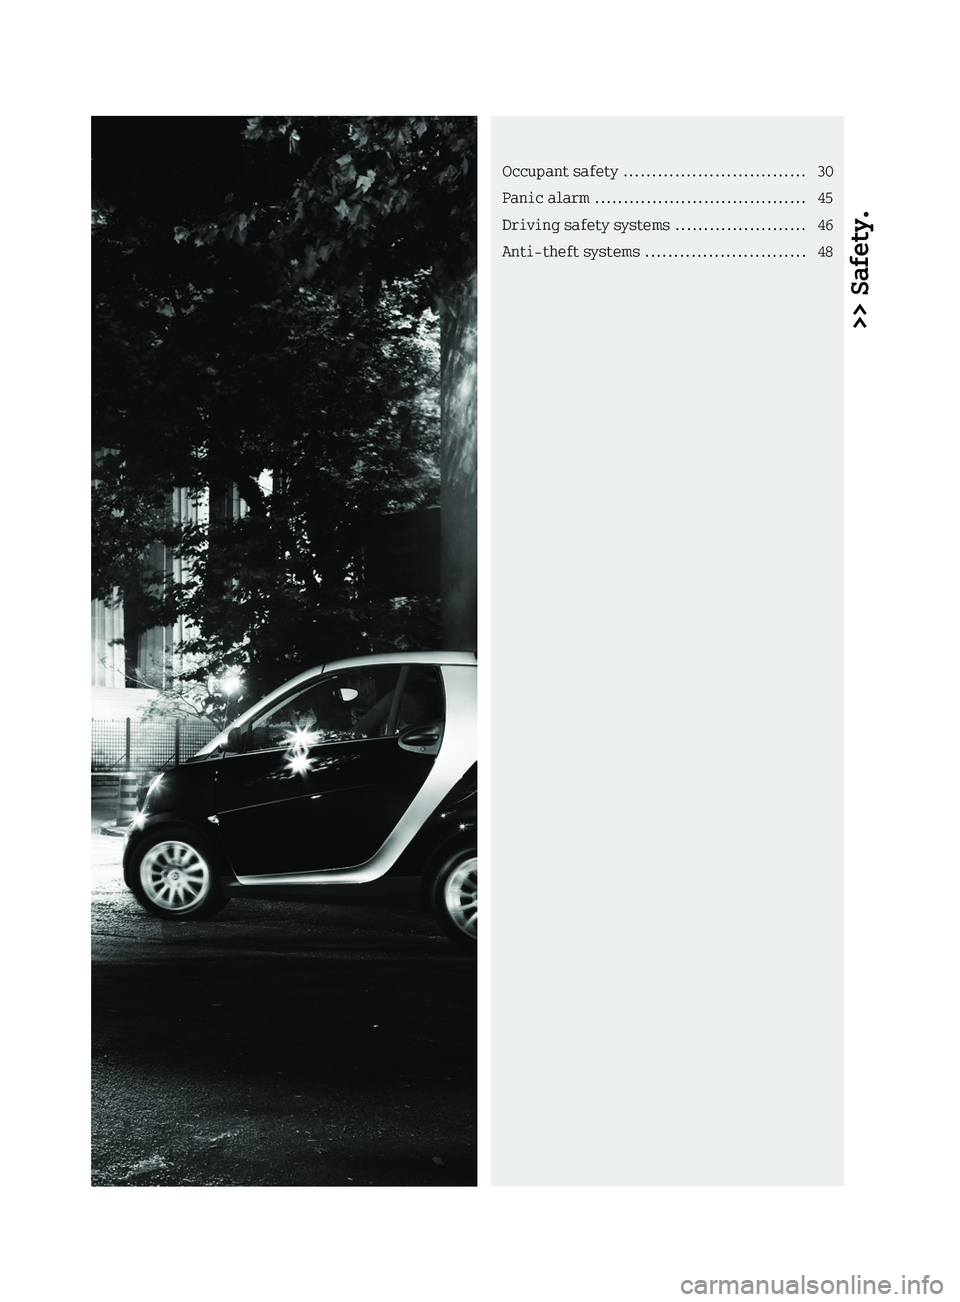 SMART FORTWO COUPE 2011 Owners Guide >> Safety.Occupant safety ................................30
Panic alarm .....................................45
Driving safety systems .......................46
Anti-theft systems ...................